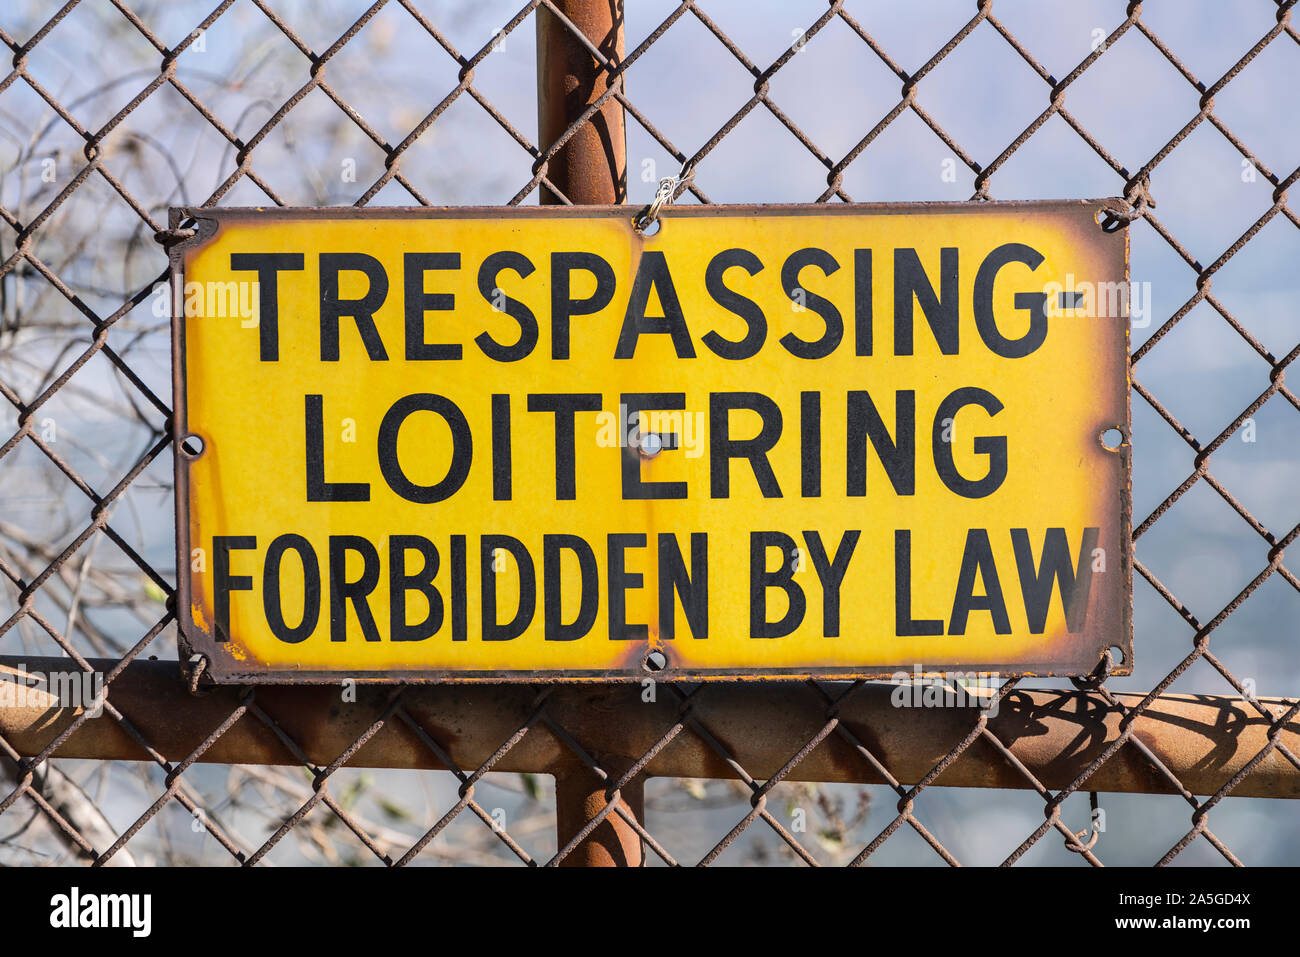 Old Trespassing and Loitering Forbidden by Law sign on rusty chain link fence. Stock Photo